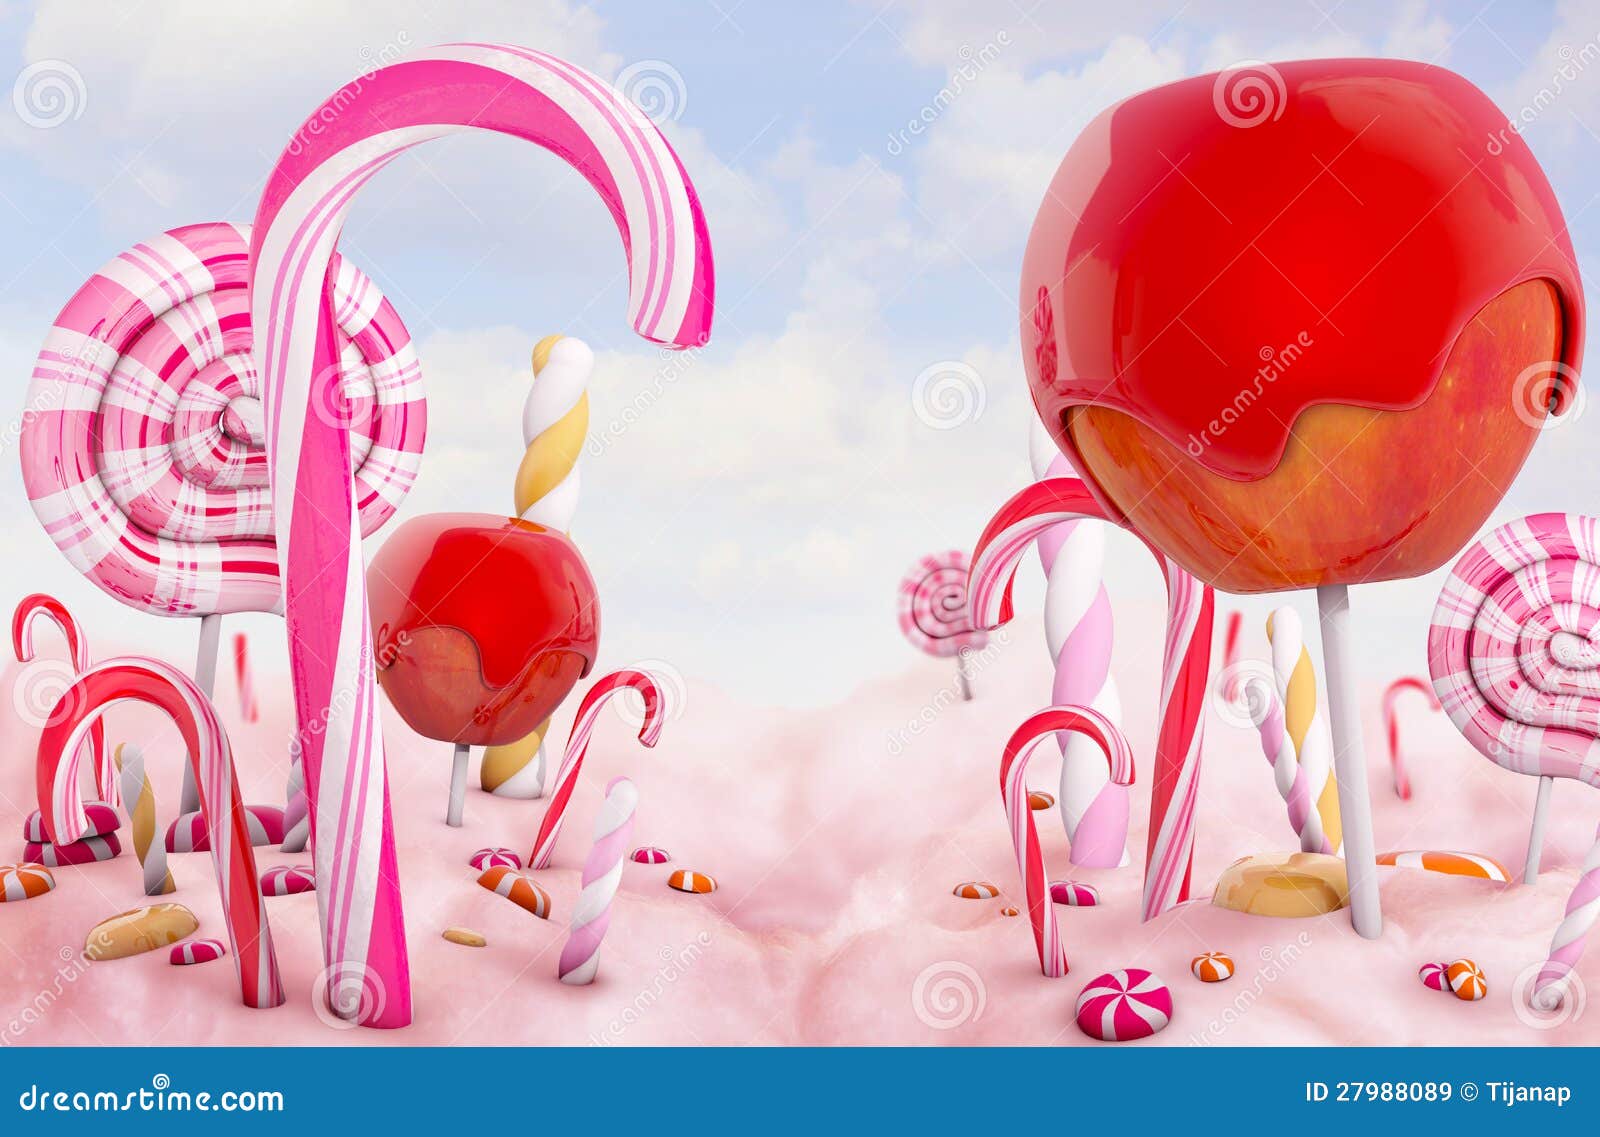 Candy Land Stock Illustration Illustration Of Apple 27988089 Images, Photos, Reviews